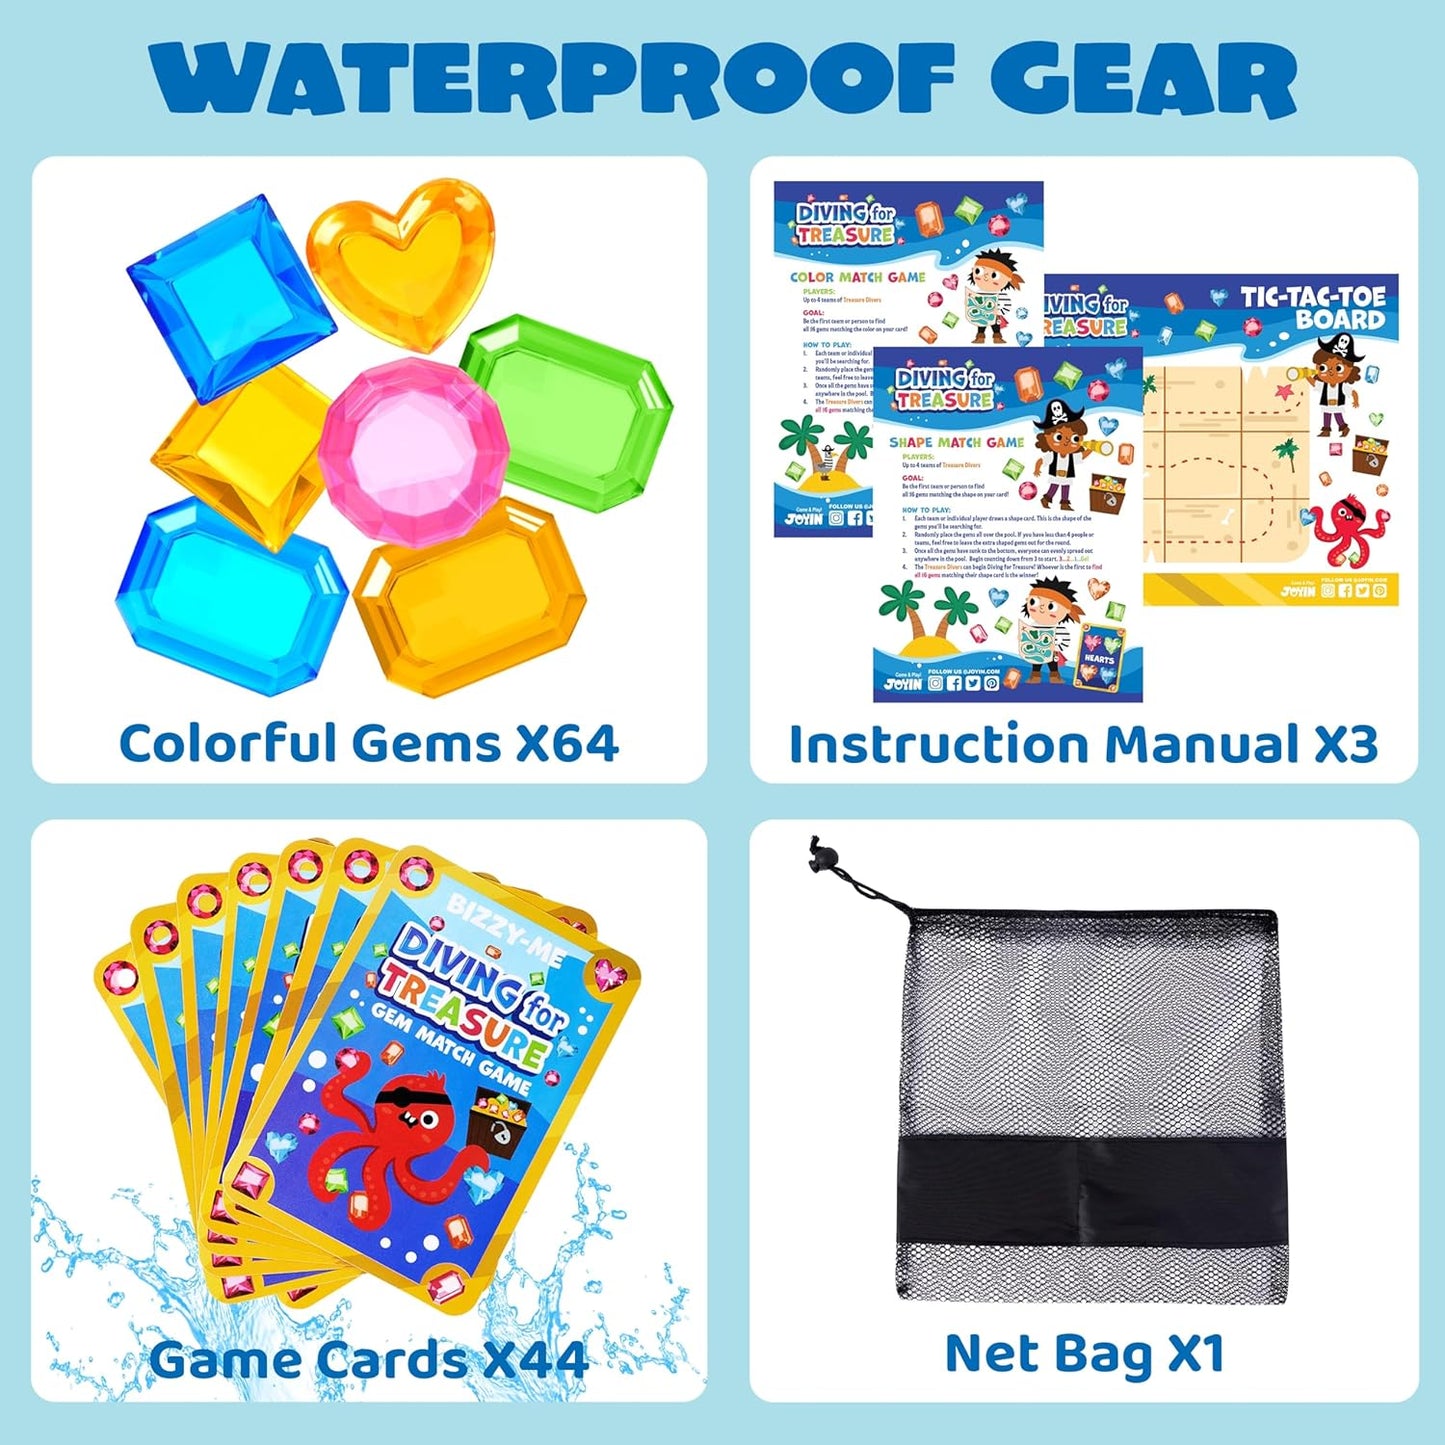 4-In-1 Diving Pool Toys, Underwater Seek and Find Gems Game Set Waterproof, Swiming Pool Toys for Kids with Mesh Bag, Water Toy Gifts for Summer Swim Dive Search Treasure Match Games